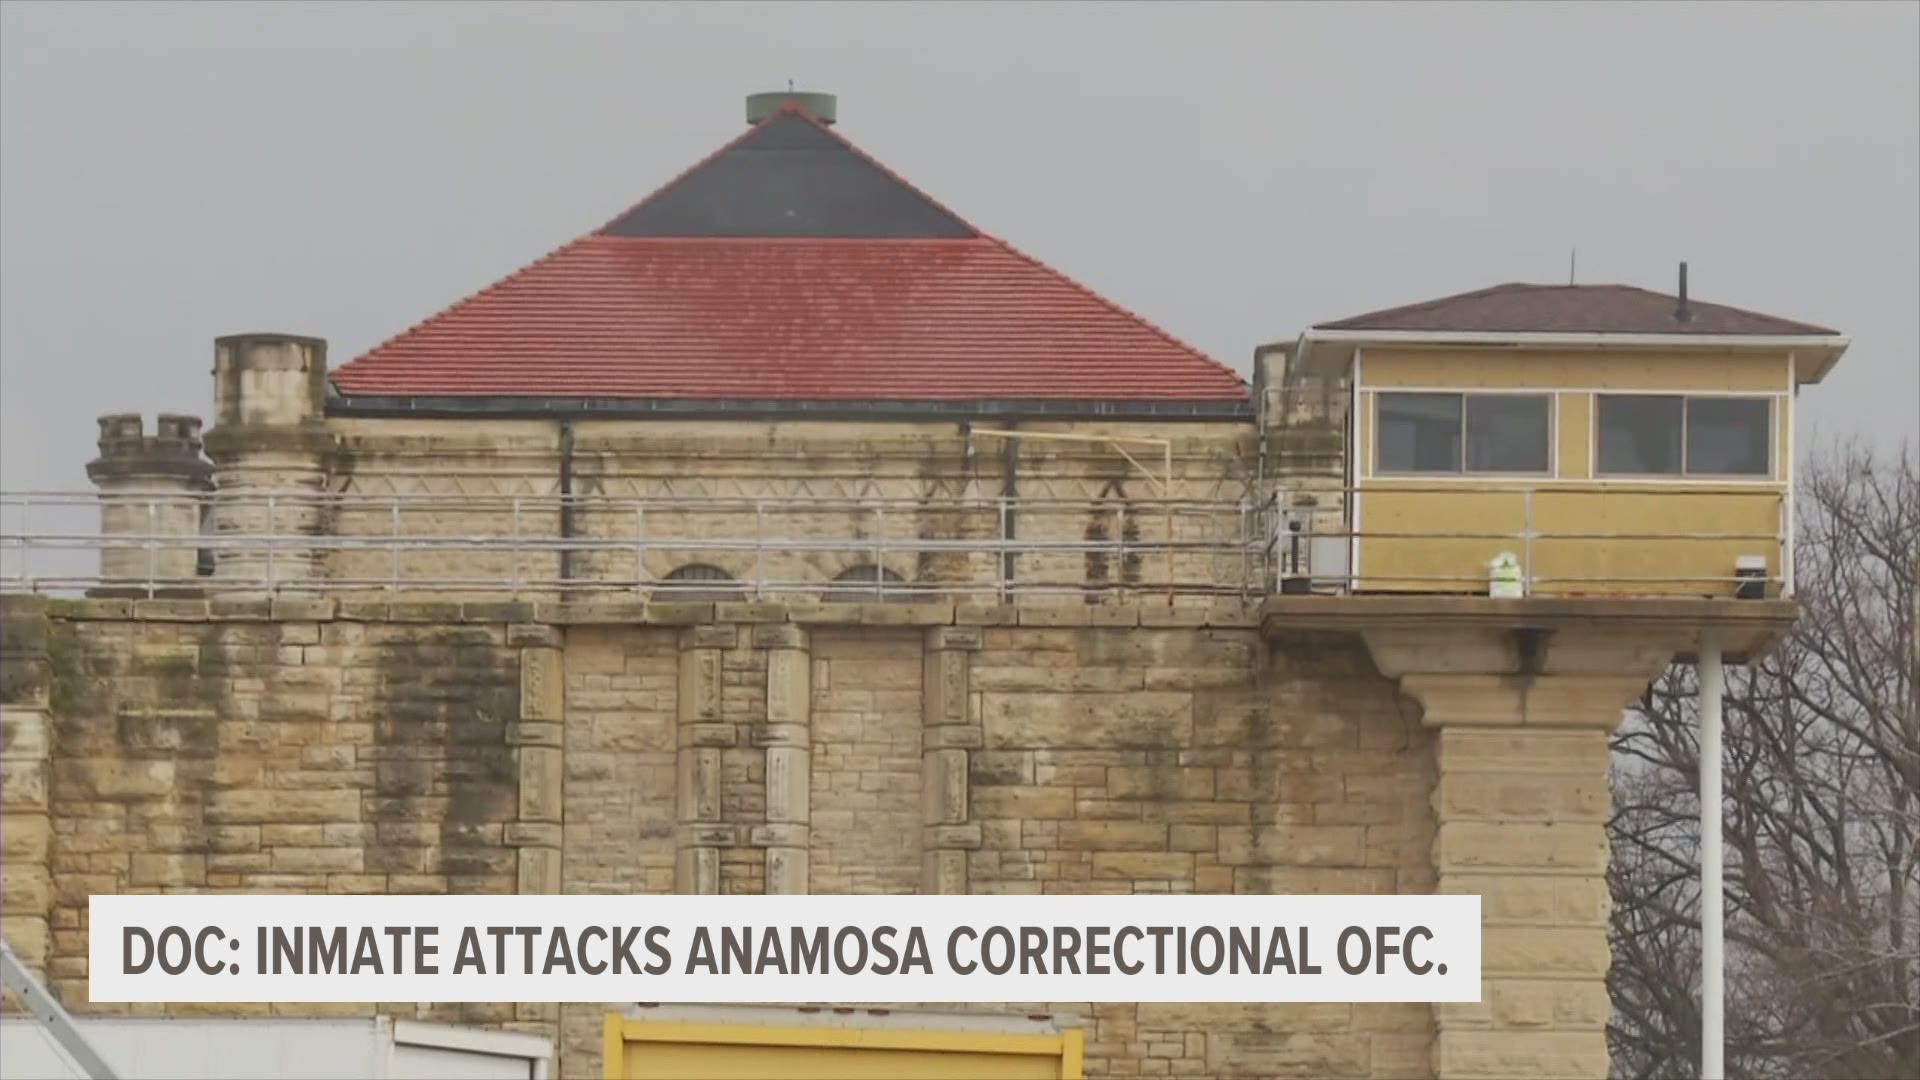 The assault comes nearly one month to the day since the DOC said two inmates killed a nurse and a correctional officer at the same Iowa prison.